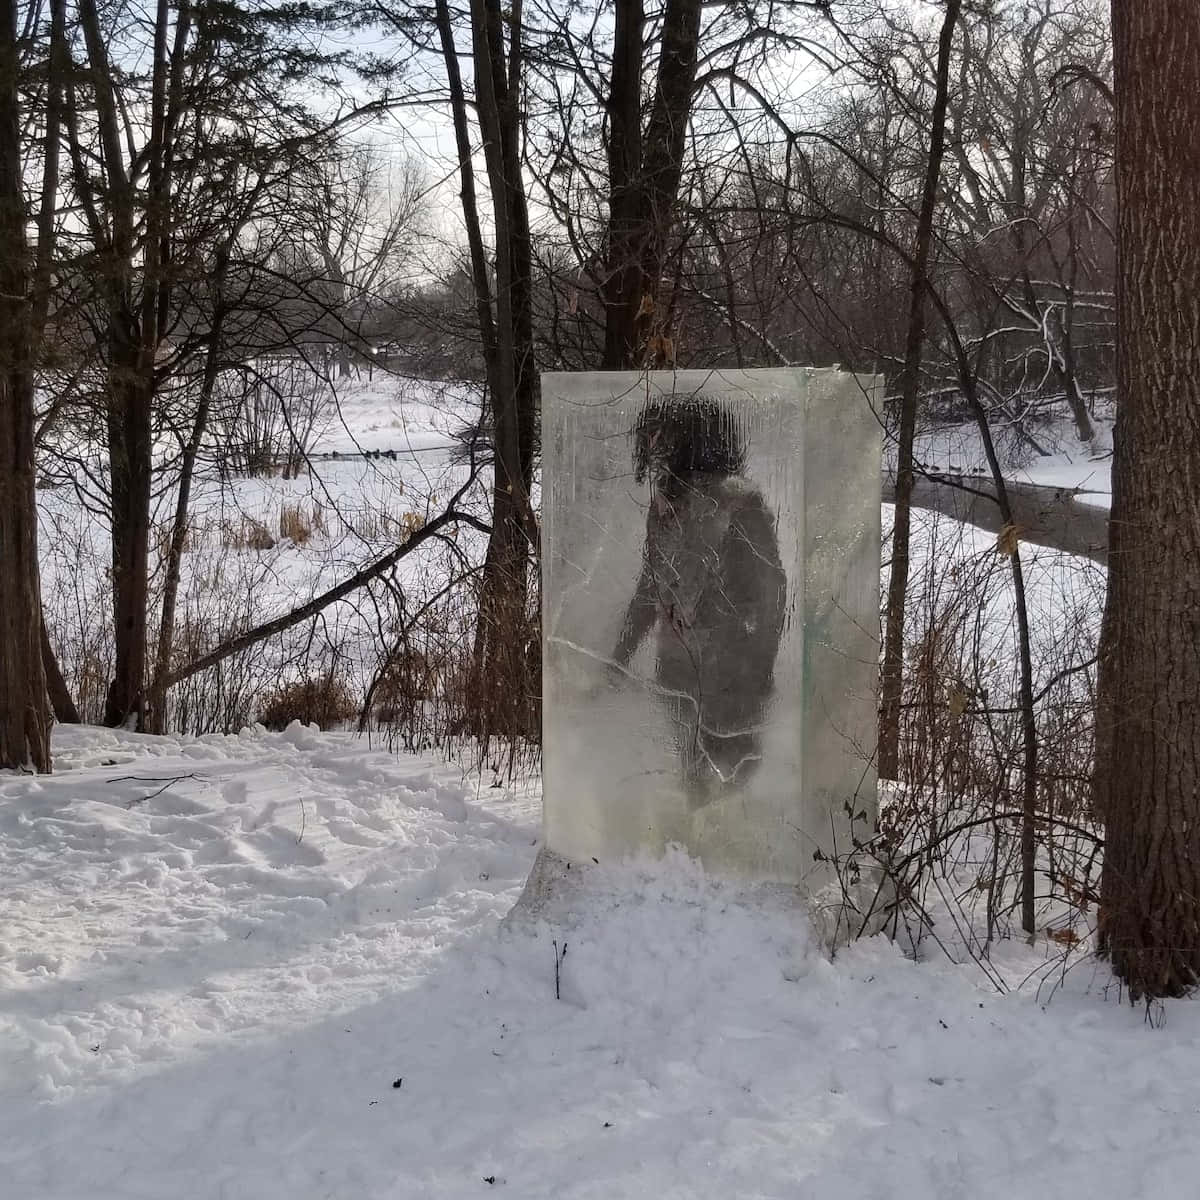 A Person Is Standing In The Snow Next To A Snow Sculpture